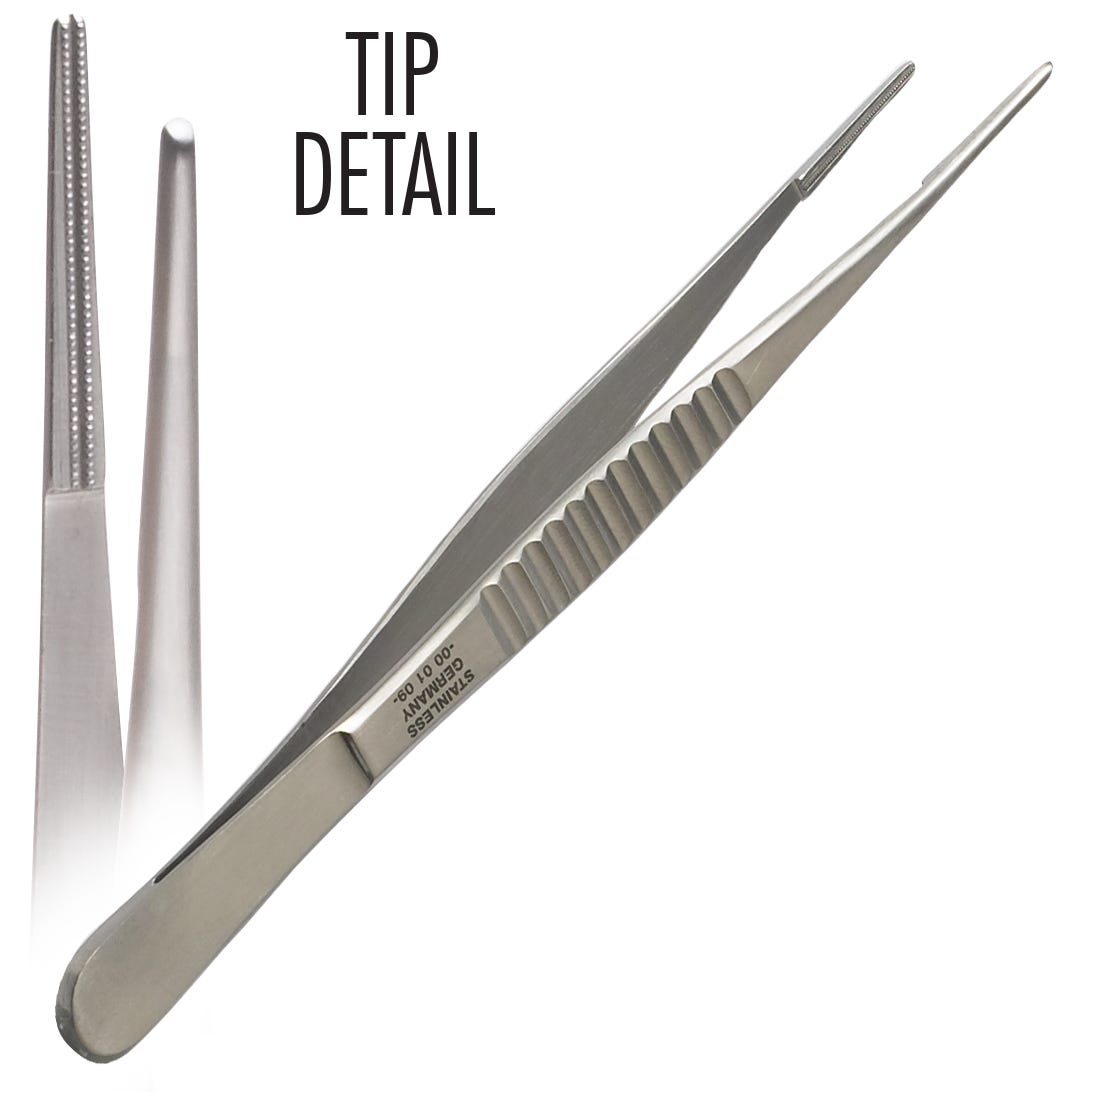 ACE DeBakey Tissue Forceps, 1.5mm wide tips, small